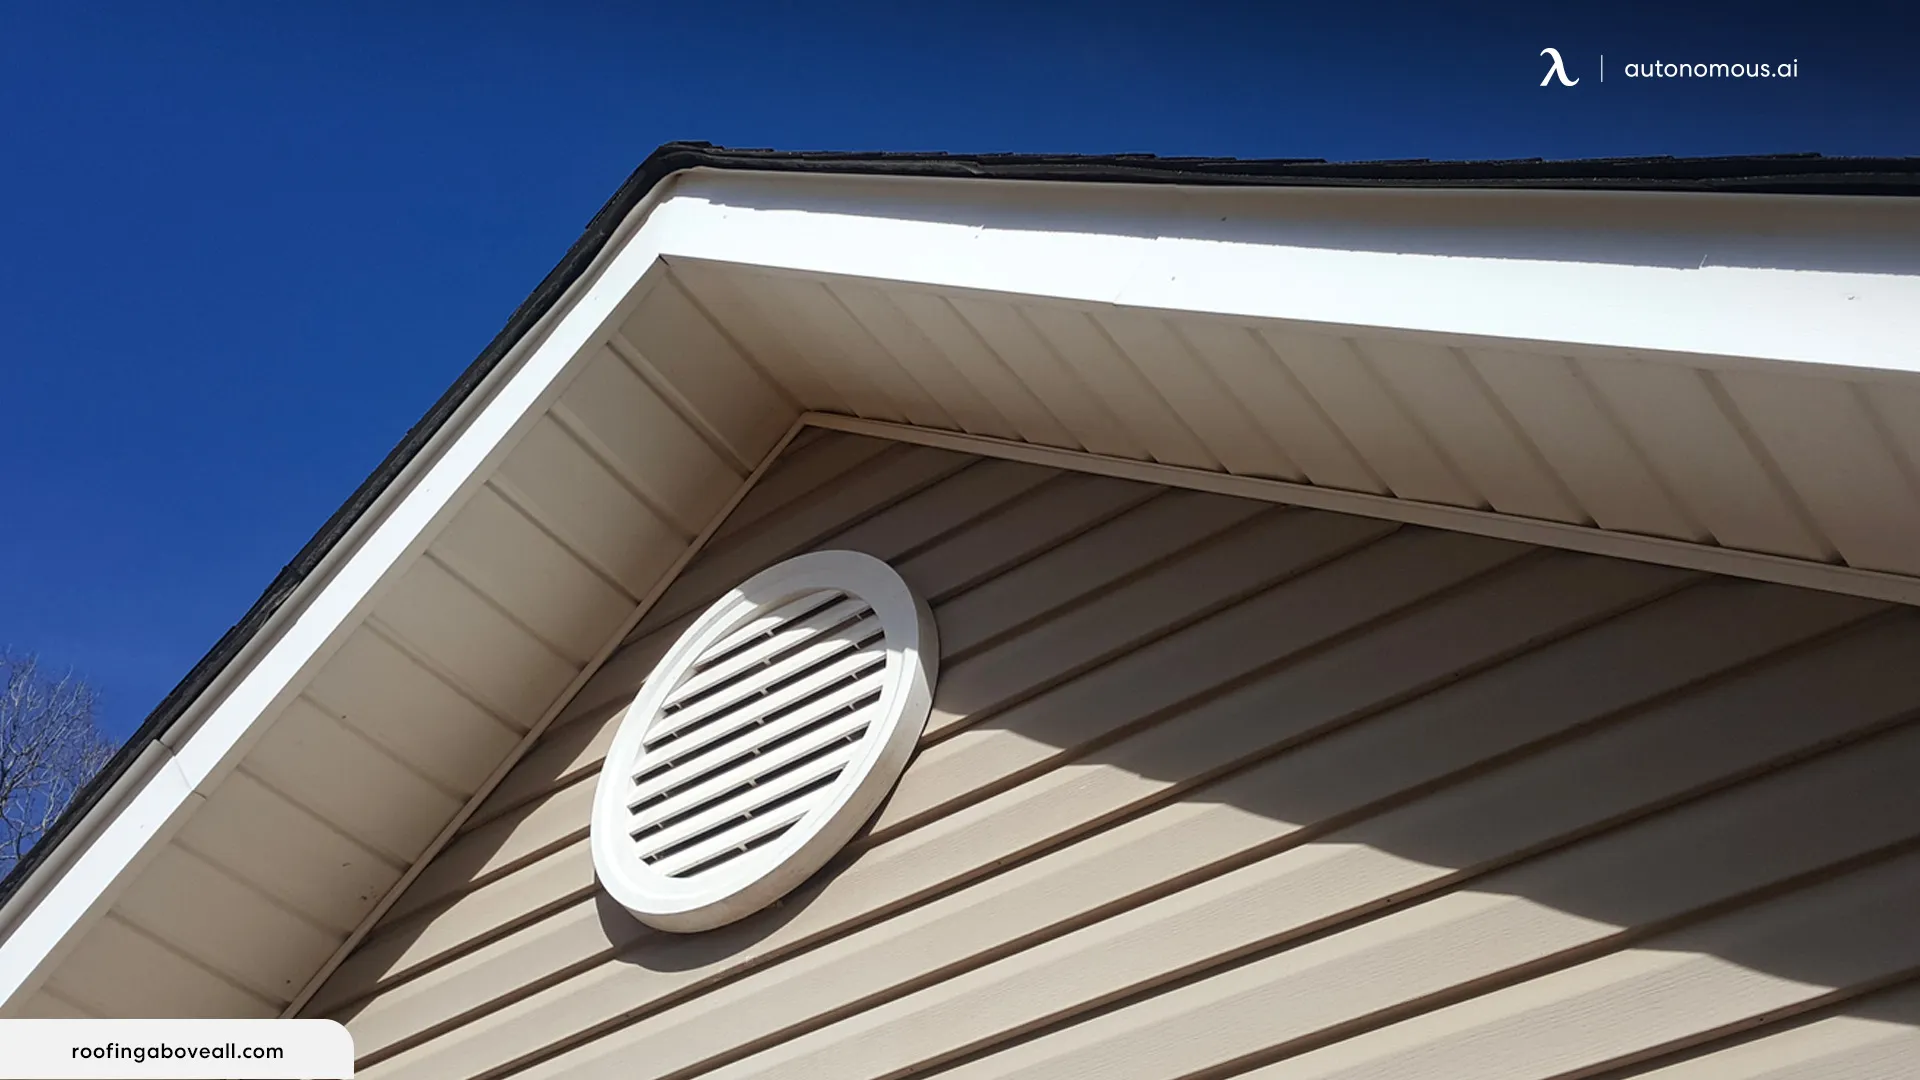 Let's Talk Why Shed Ventilation Matters?